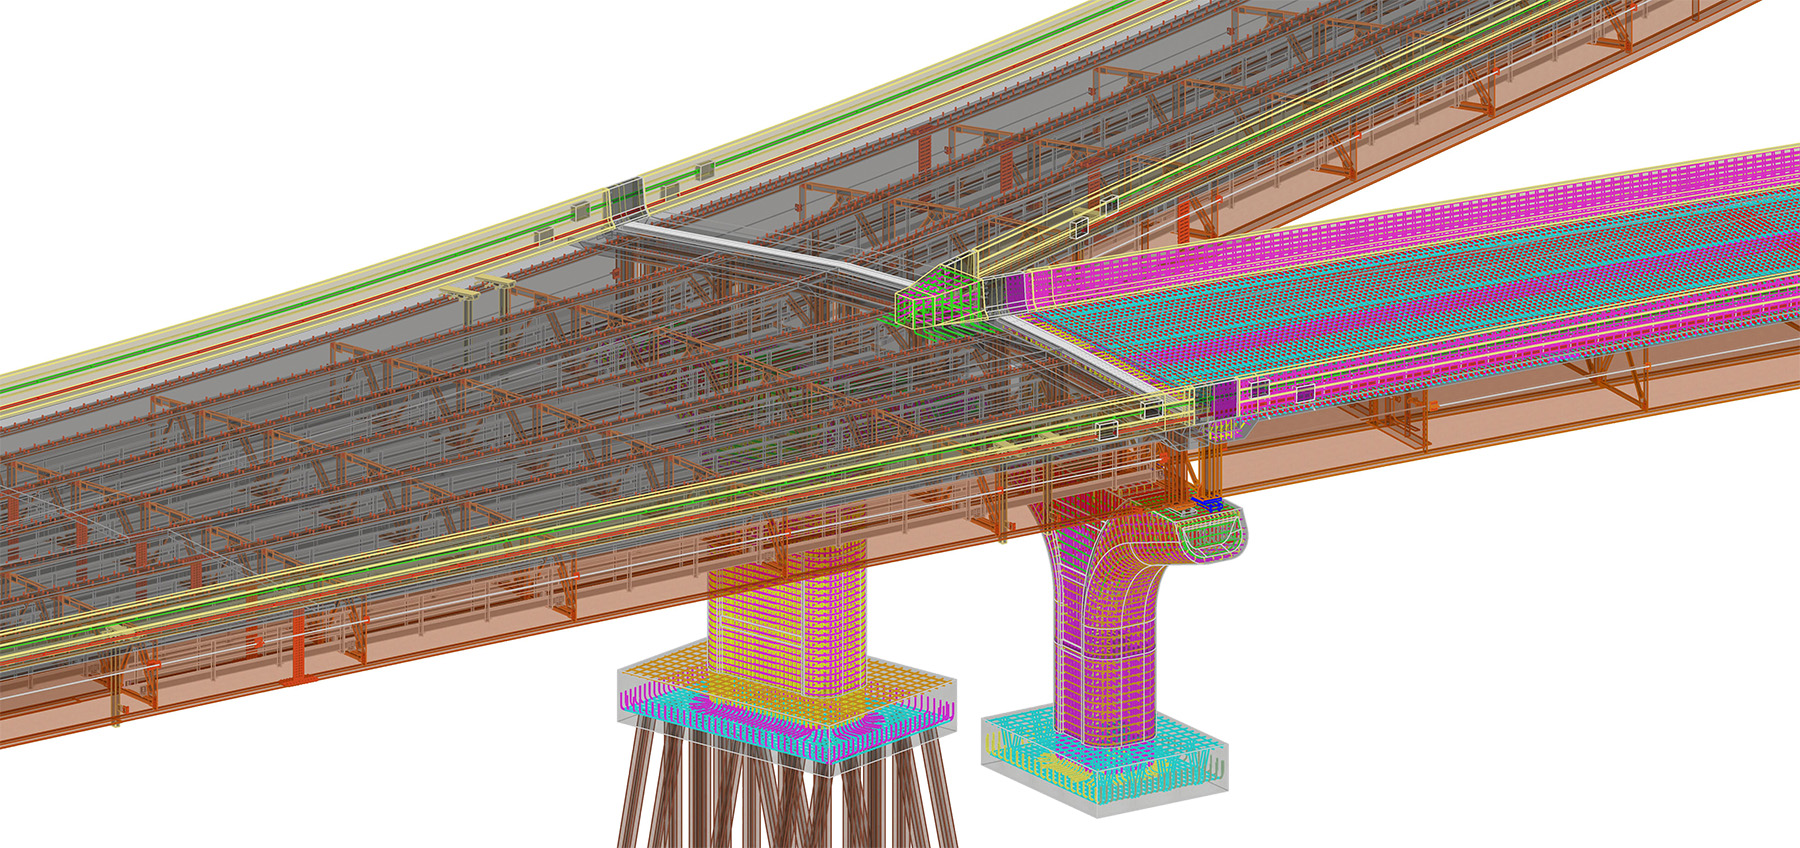 3D Multicolored visualization model of a section of highway.